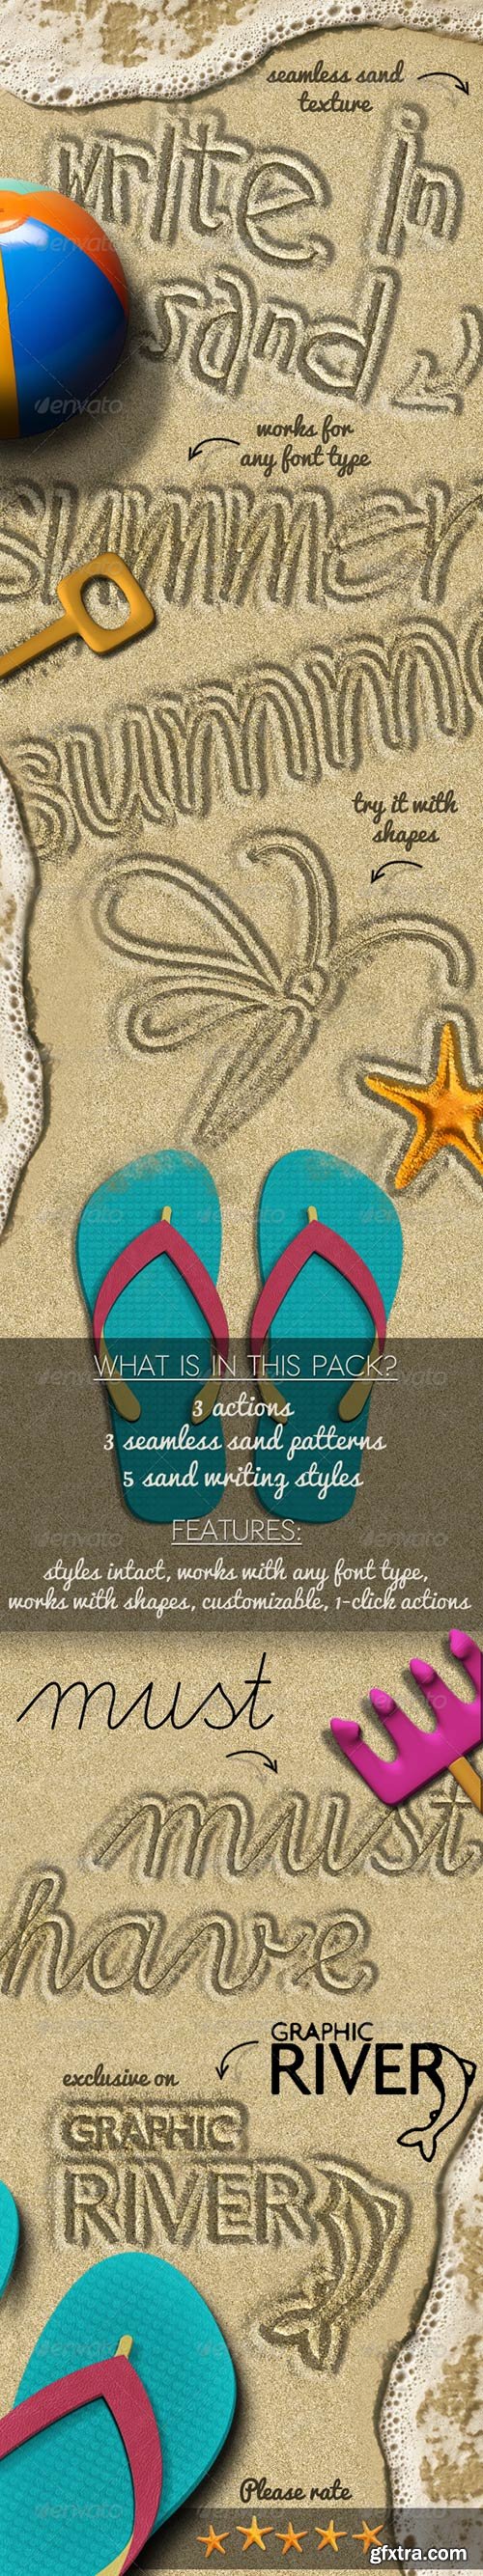 GraphicRiver - Sand Writing Photoshop Action 8096811